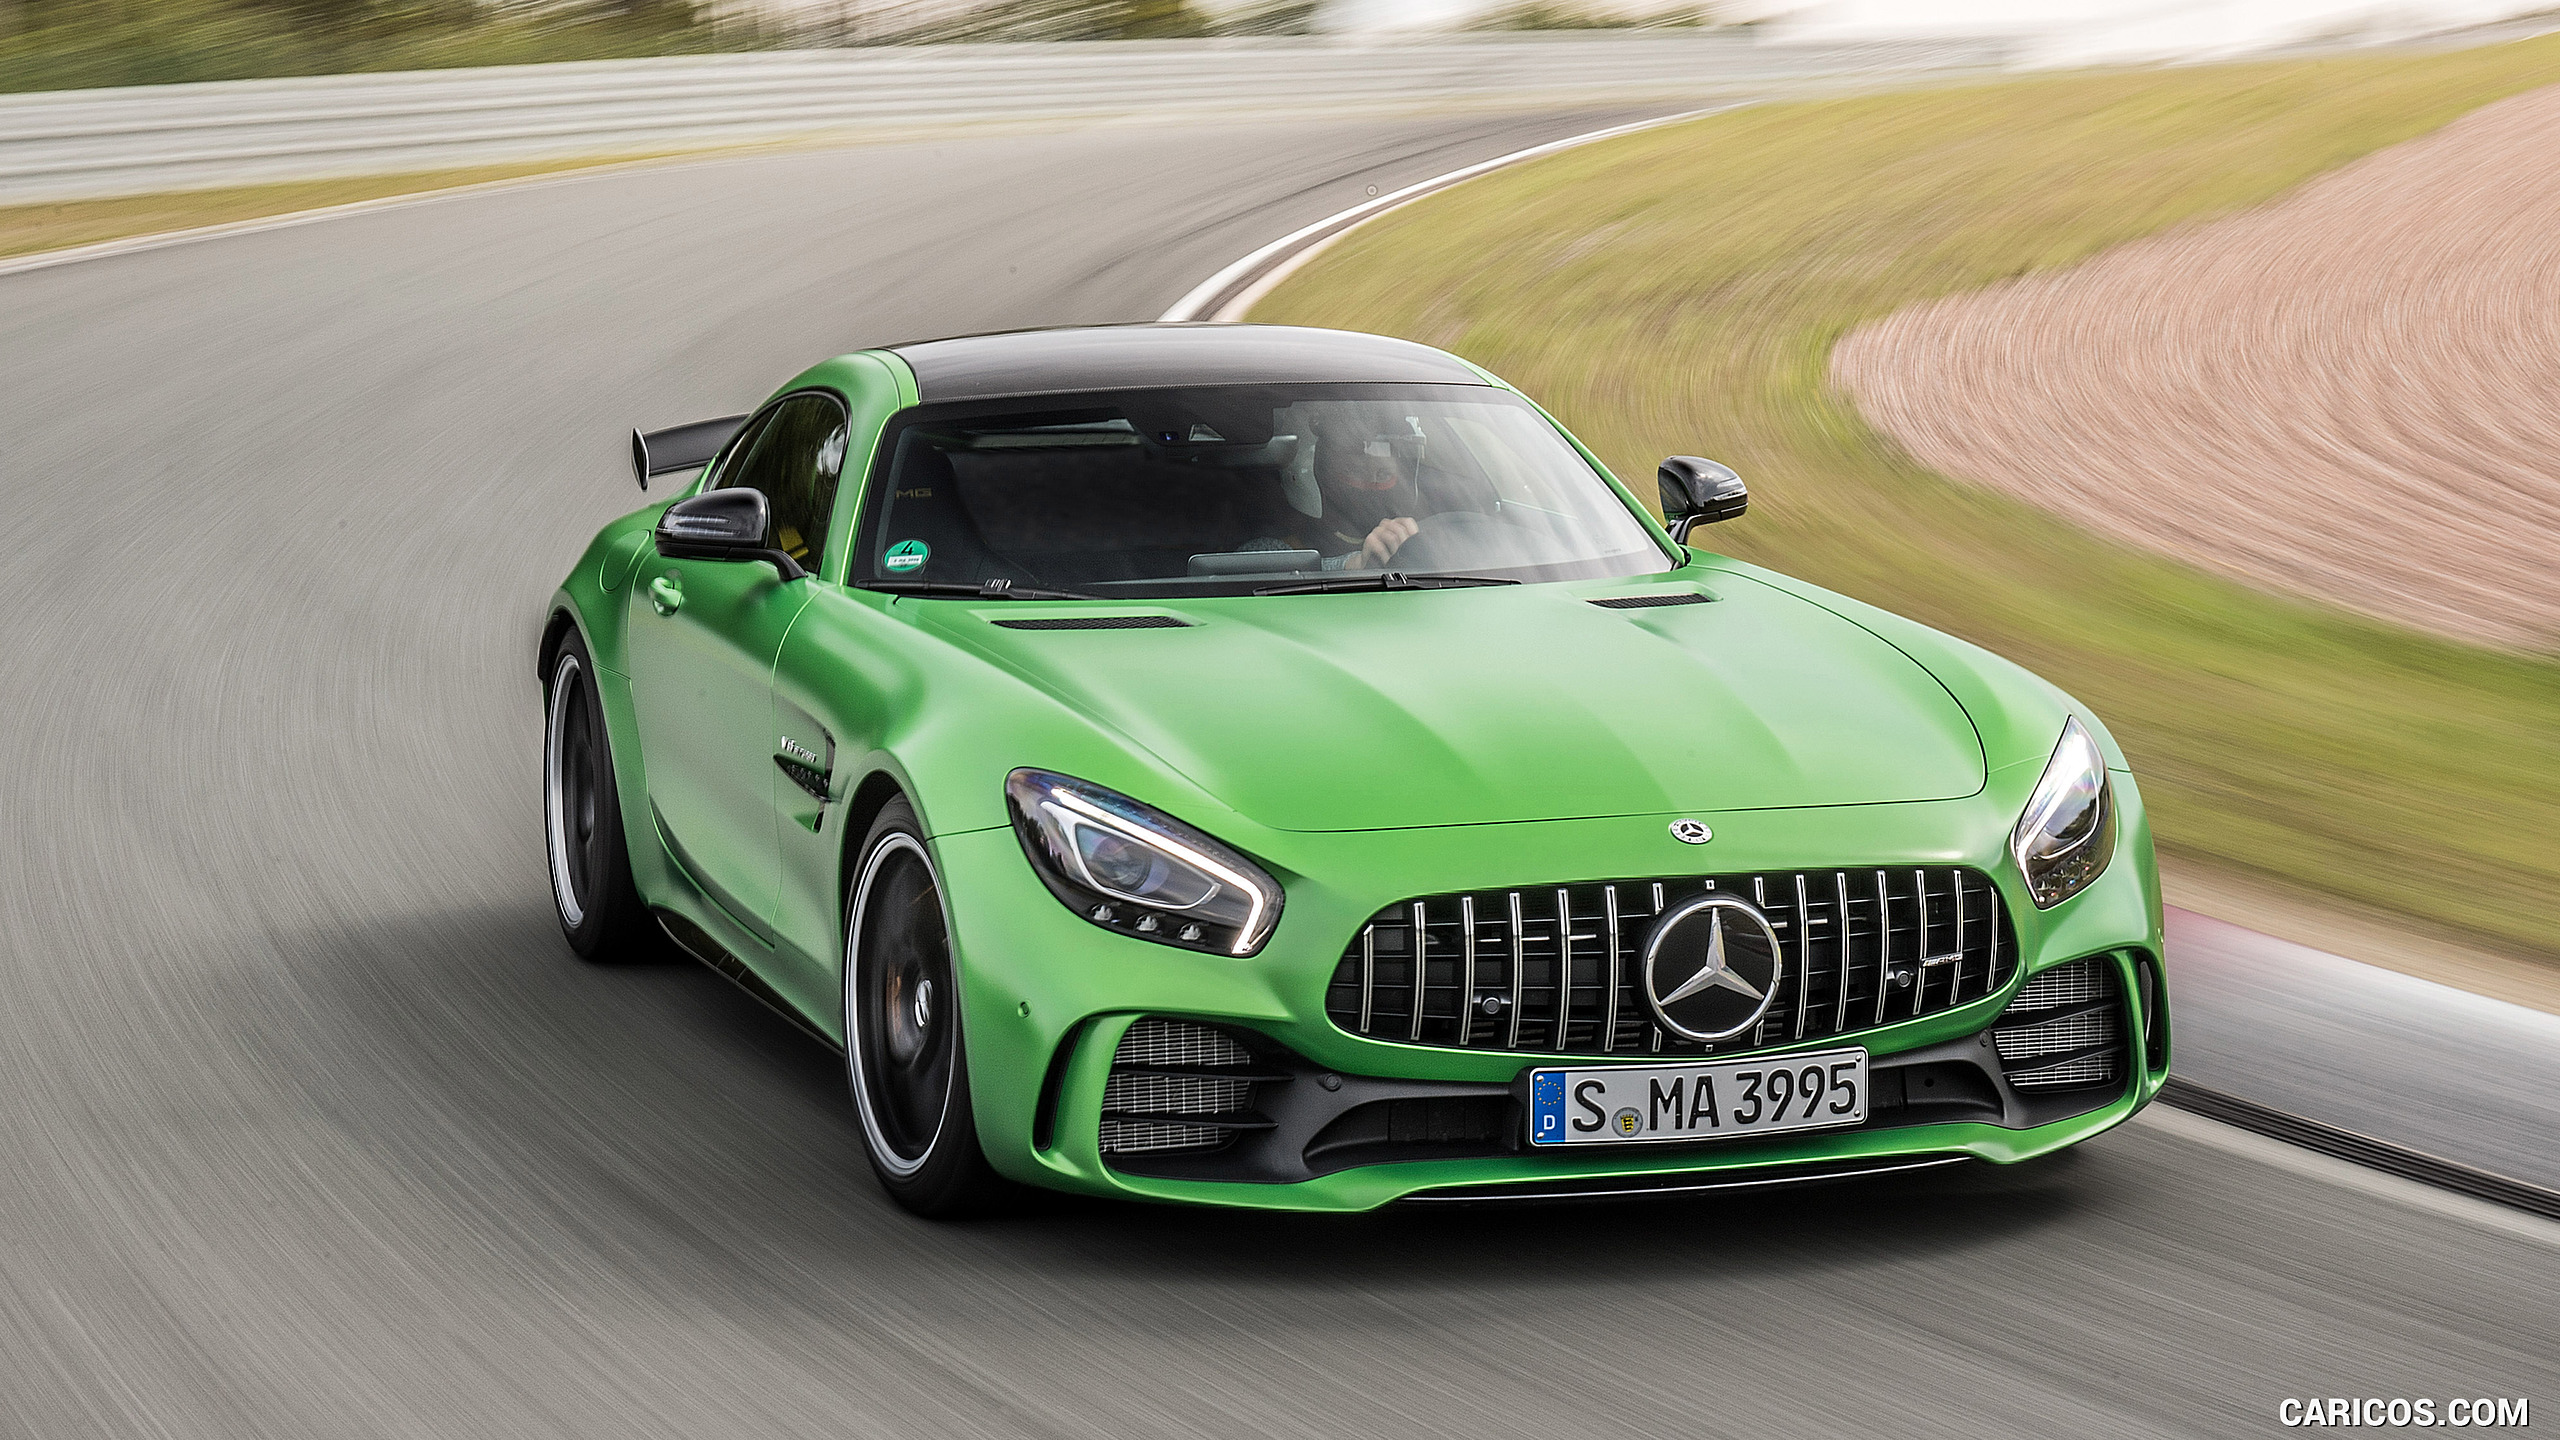 2017 Mercedes-AMG GT R Coupe - Front, #143 of 182